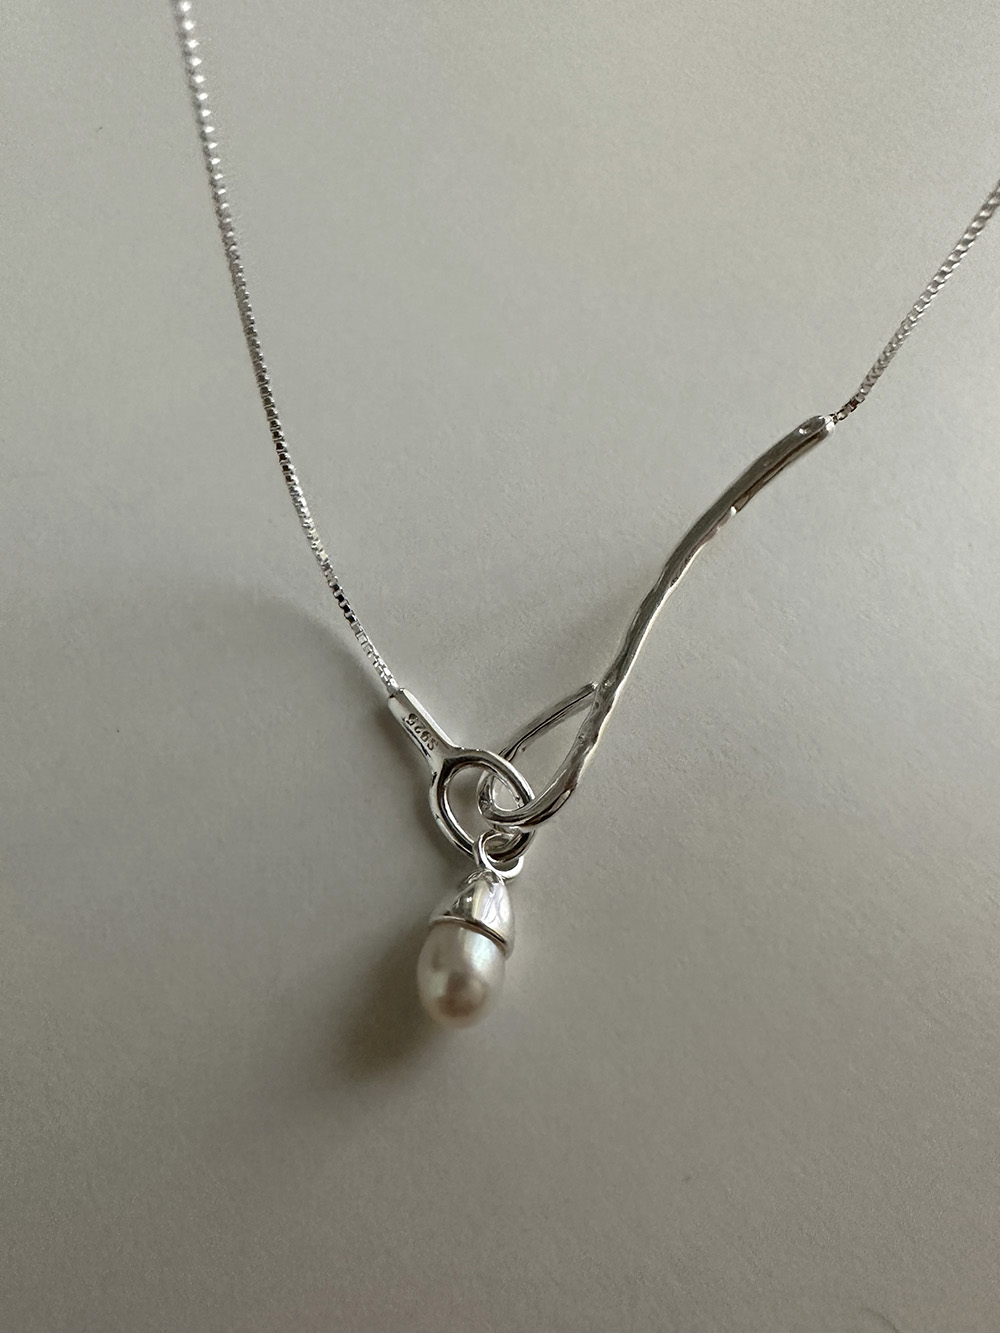 [92.5 silver] Bud pearl necklace